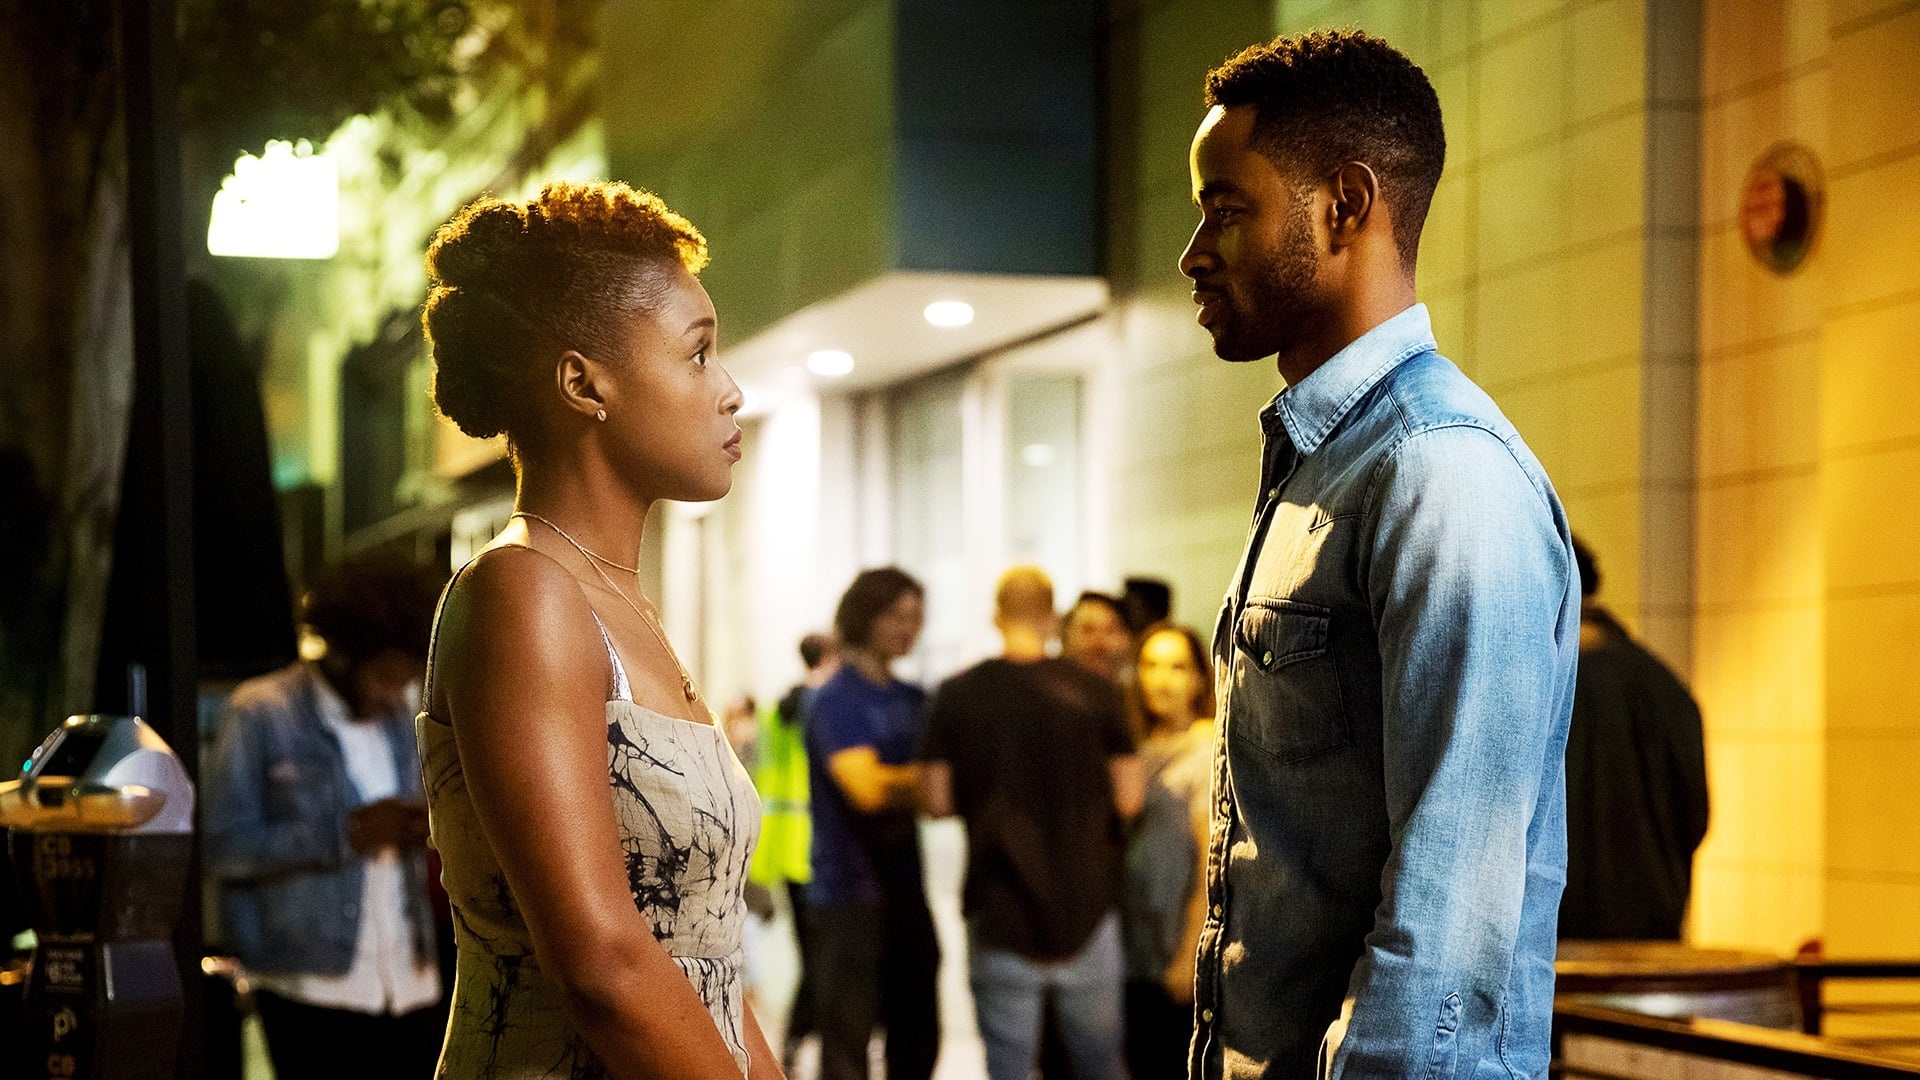 Insecure 2x7, O2tvseries exclusive, Streaming links, Online discussions, 1920x1080 Full HD Desktop